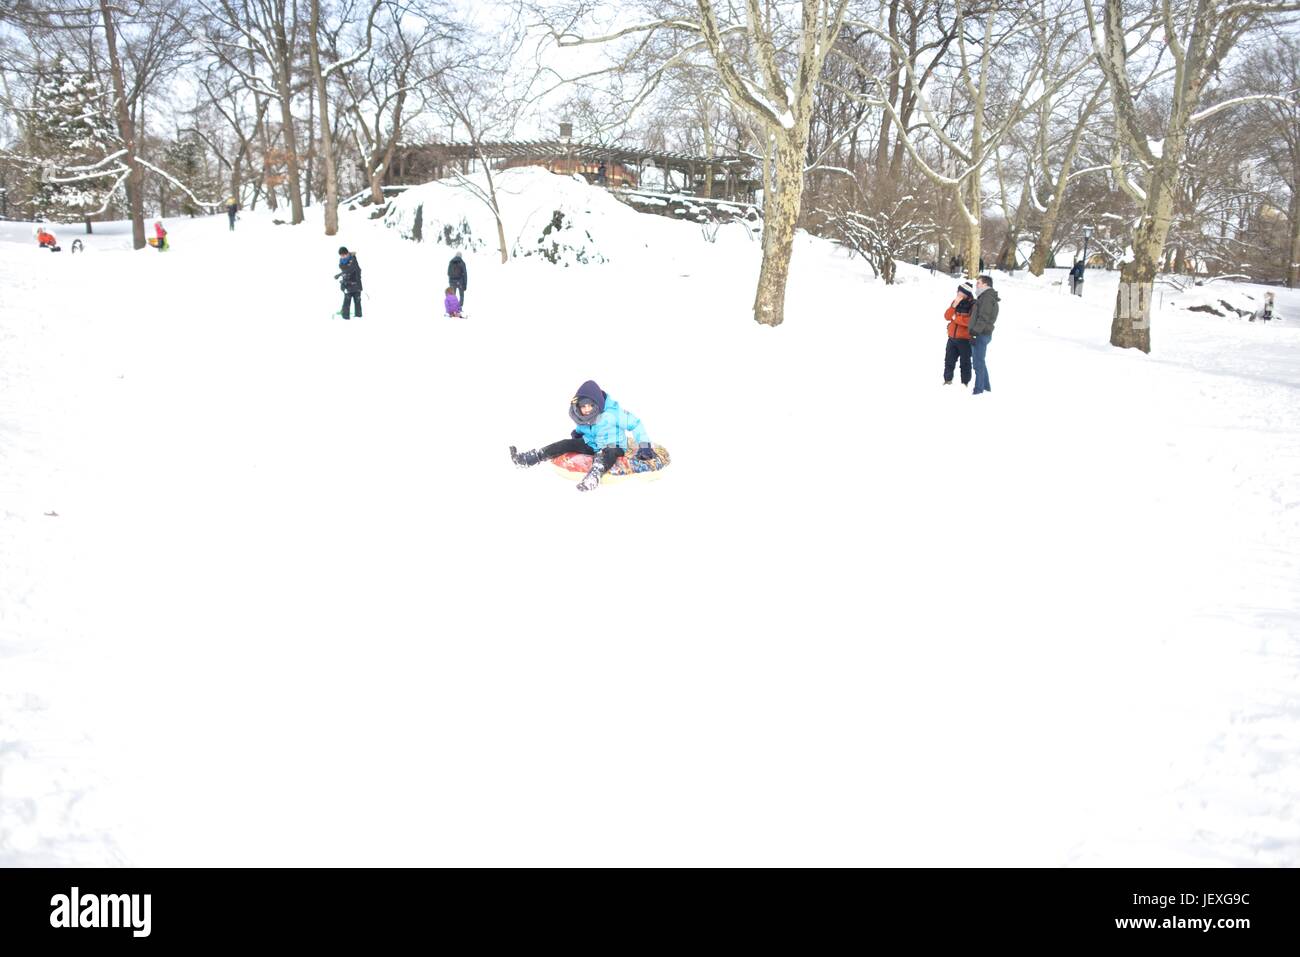 Sledding down a slope in Central Park in the aftermath of winter storm Juno. Stock Photo